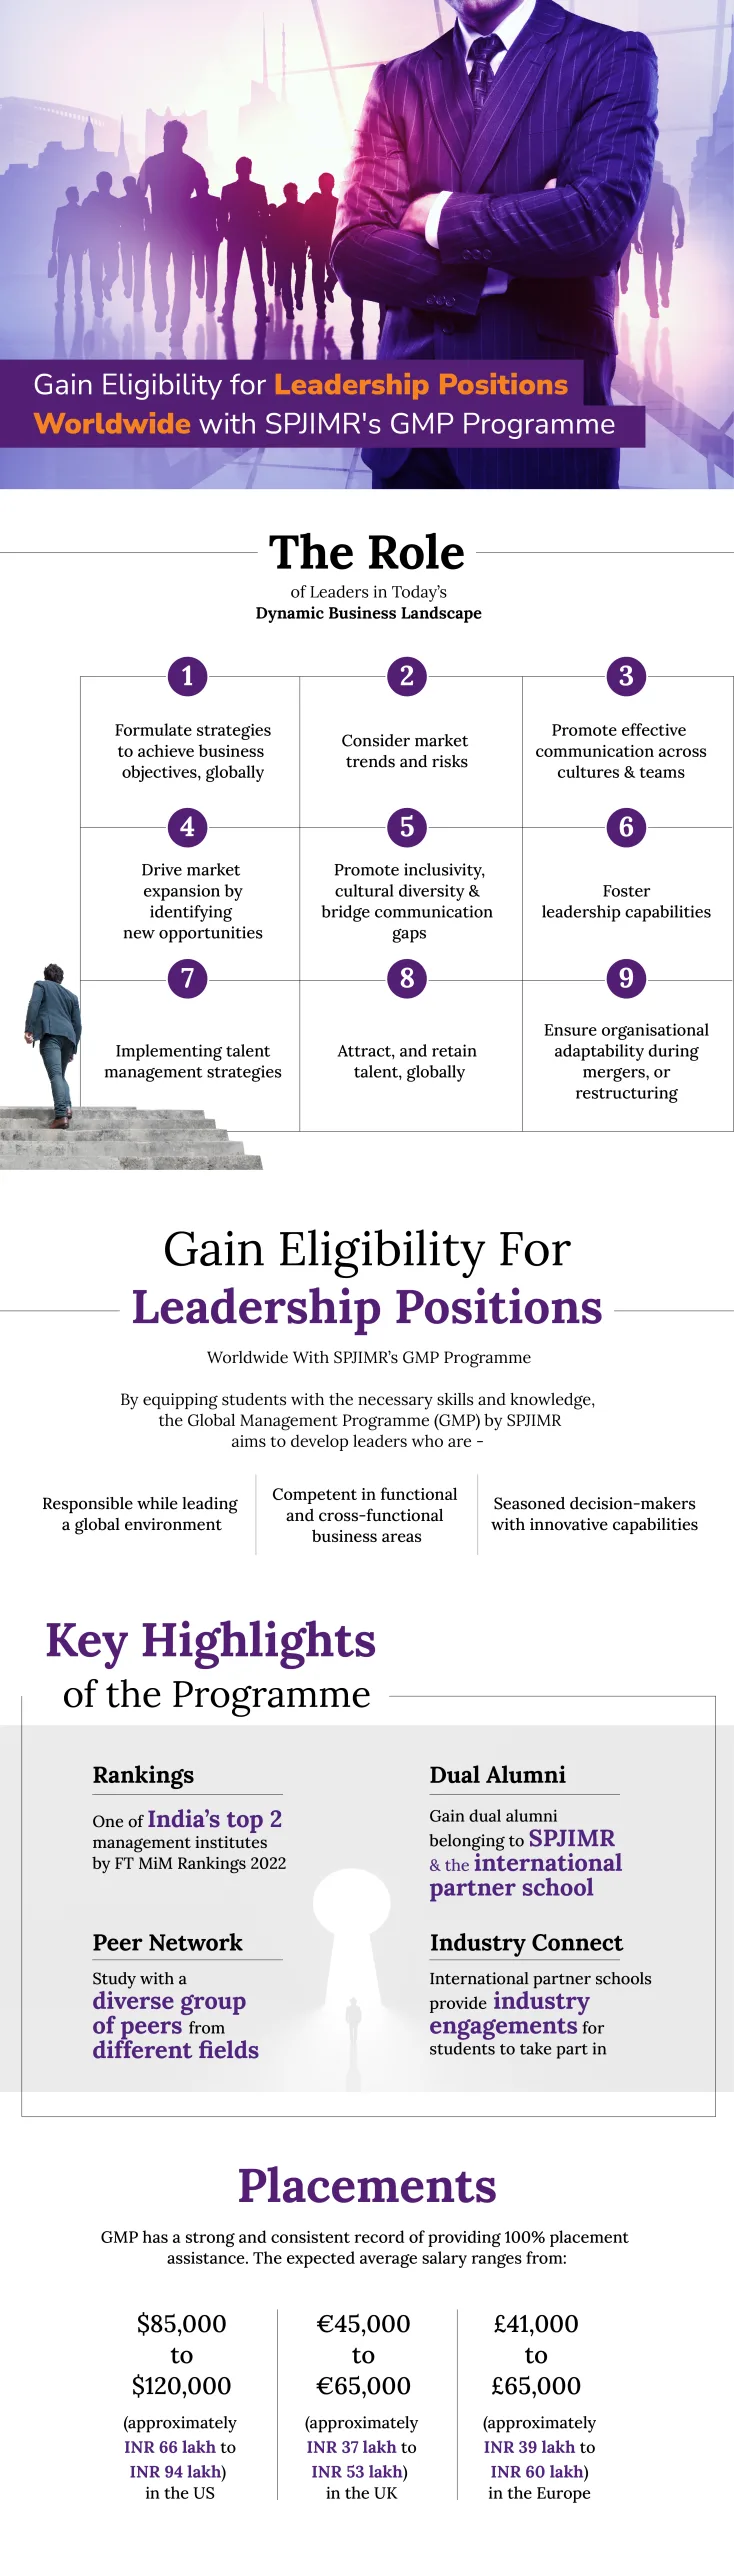 Gain Eligibility For Leadership Positions Worldwide With SPJIMR's GMP Programme